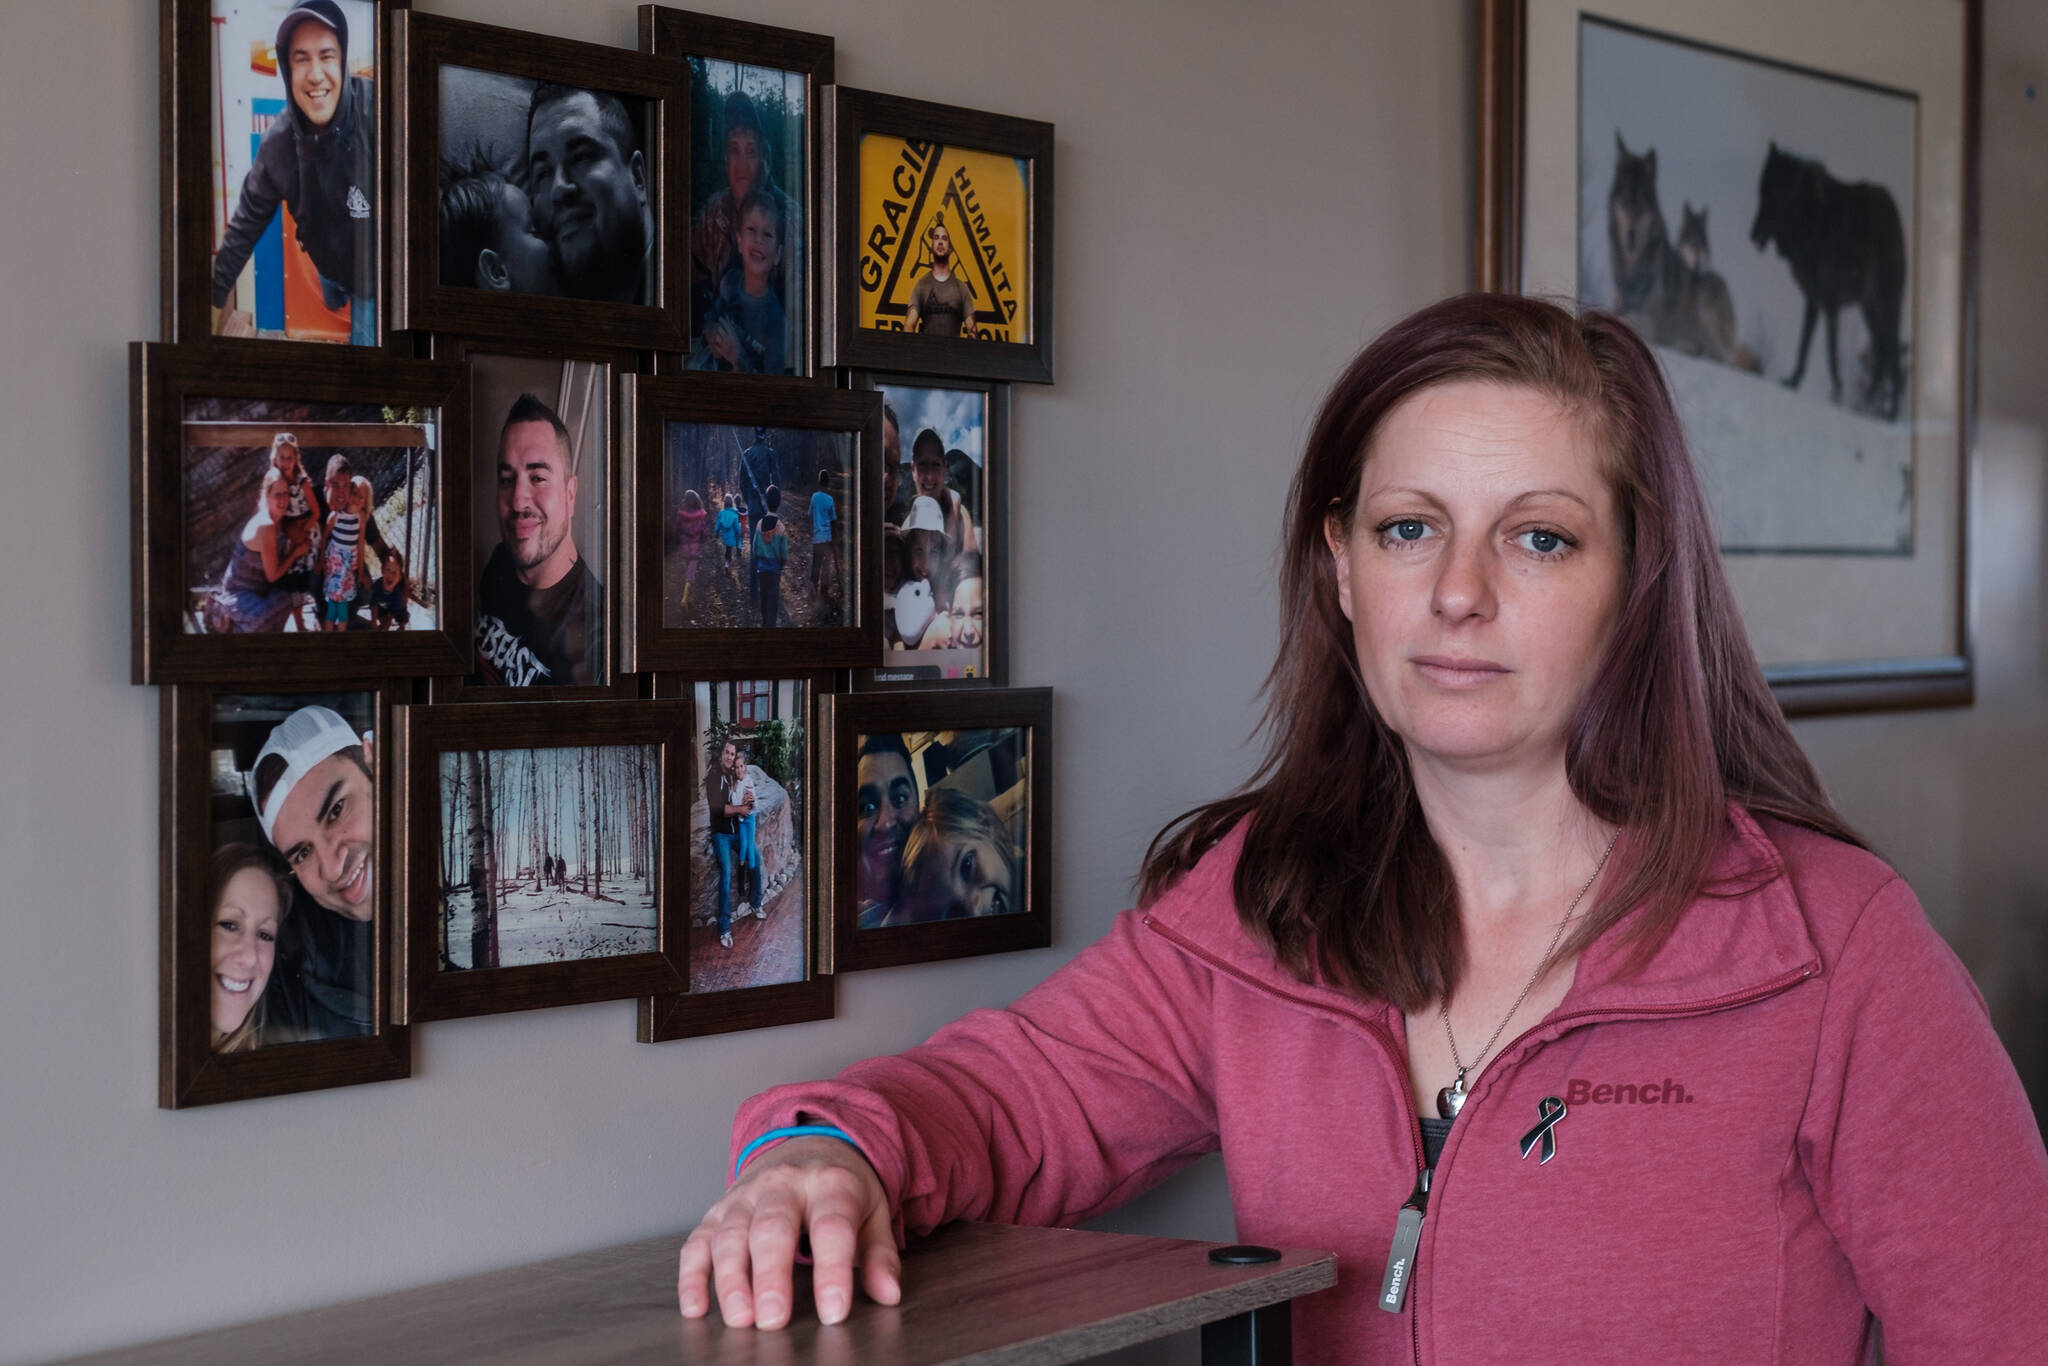 Sarah Sansom poses for a portrait at her home in Nobleford, Alta., on Friday, May 29, 2020. Sarah’s husband Jacob (Jake) Sansom and his uncle Morris Cardinal were found shot to death on a rural road in eastern Alberta in March 2020. Anthony Michael Bilodeau, 31, has been charged with two counts of second-degree murder over the deaths of Sansom and Cardinal. THE CANADIAN PRESS/David Rossiter